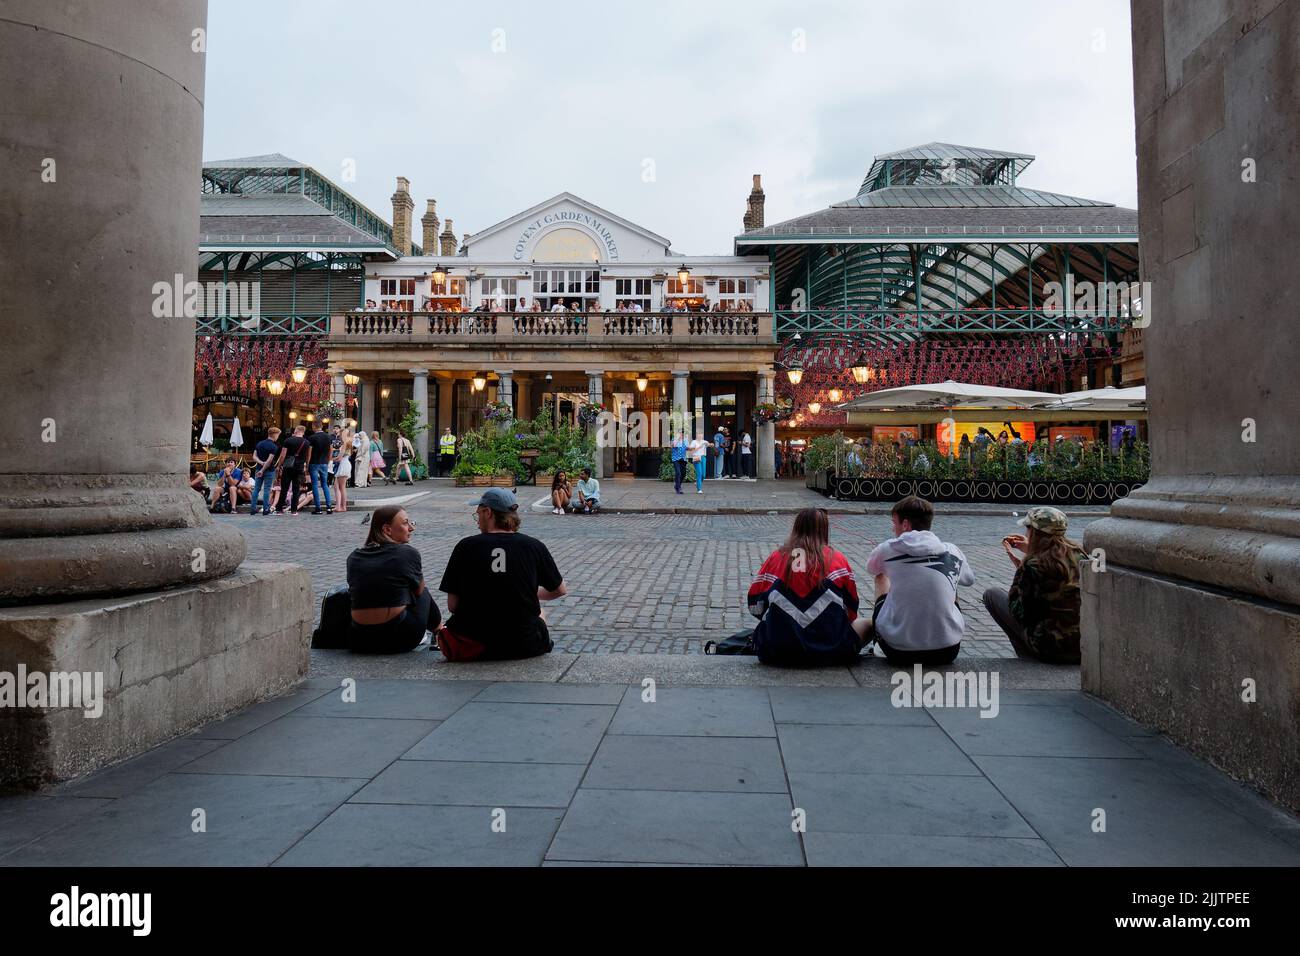 London, Greater London, England, July 20 2022: People sit and relax in the main square of Convent garden, famous for its street acts and market and ch Stock Photo